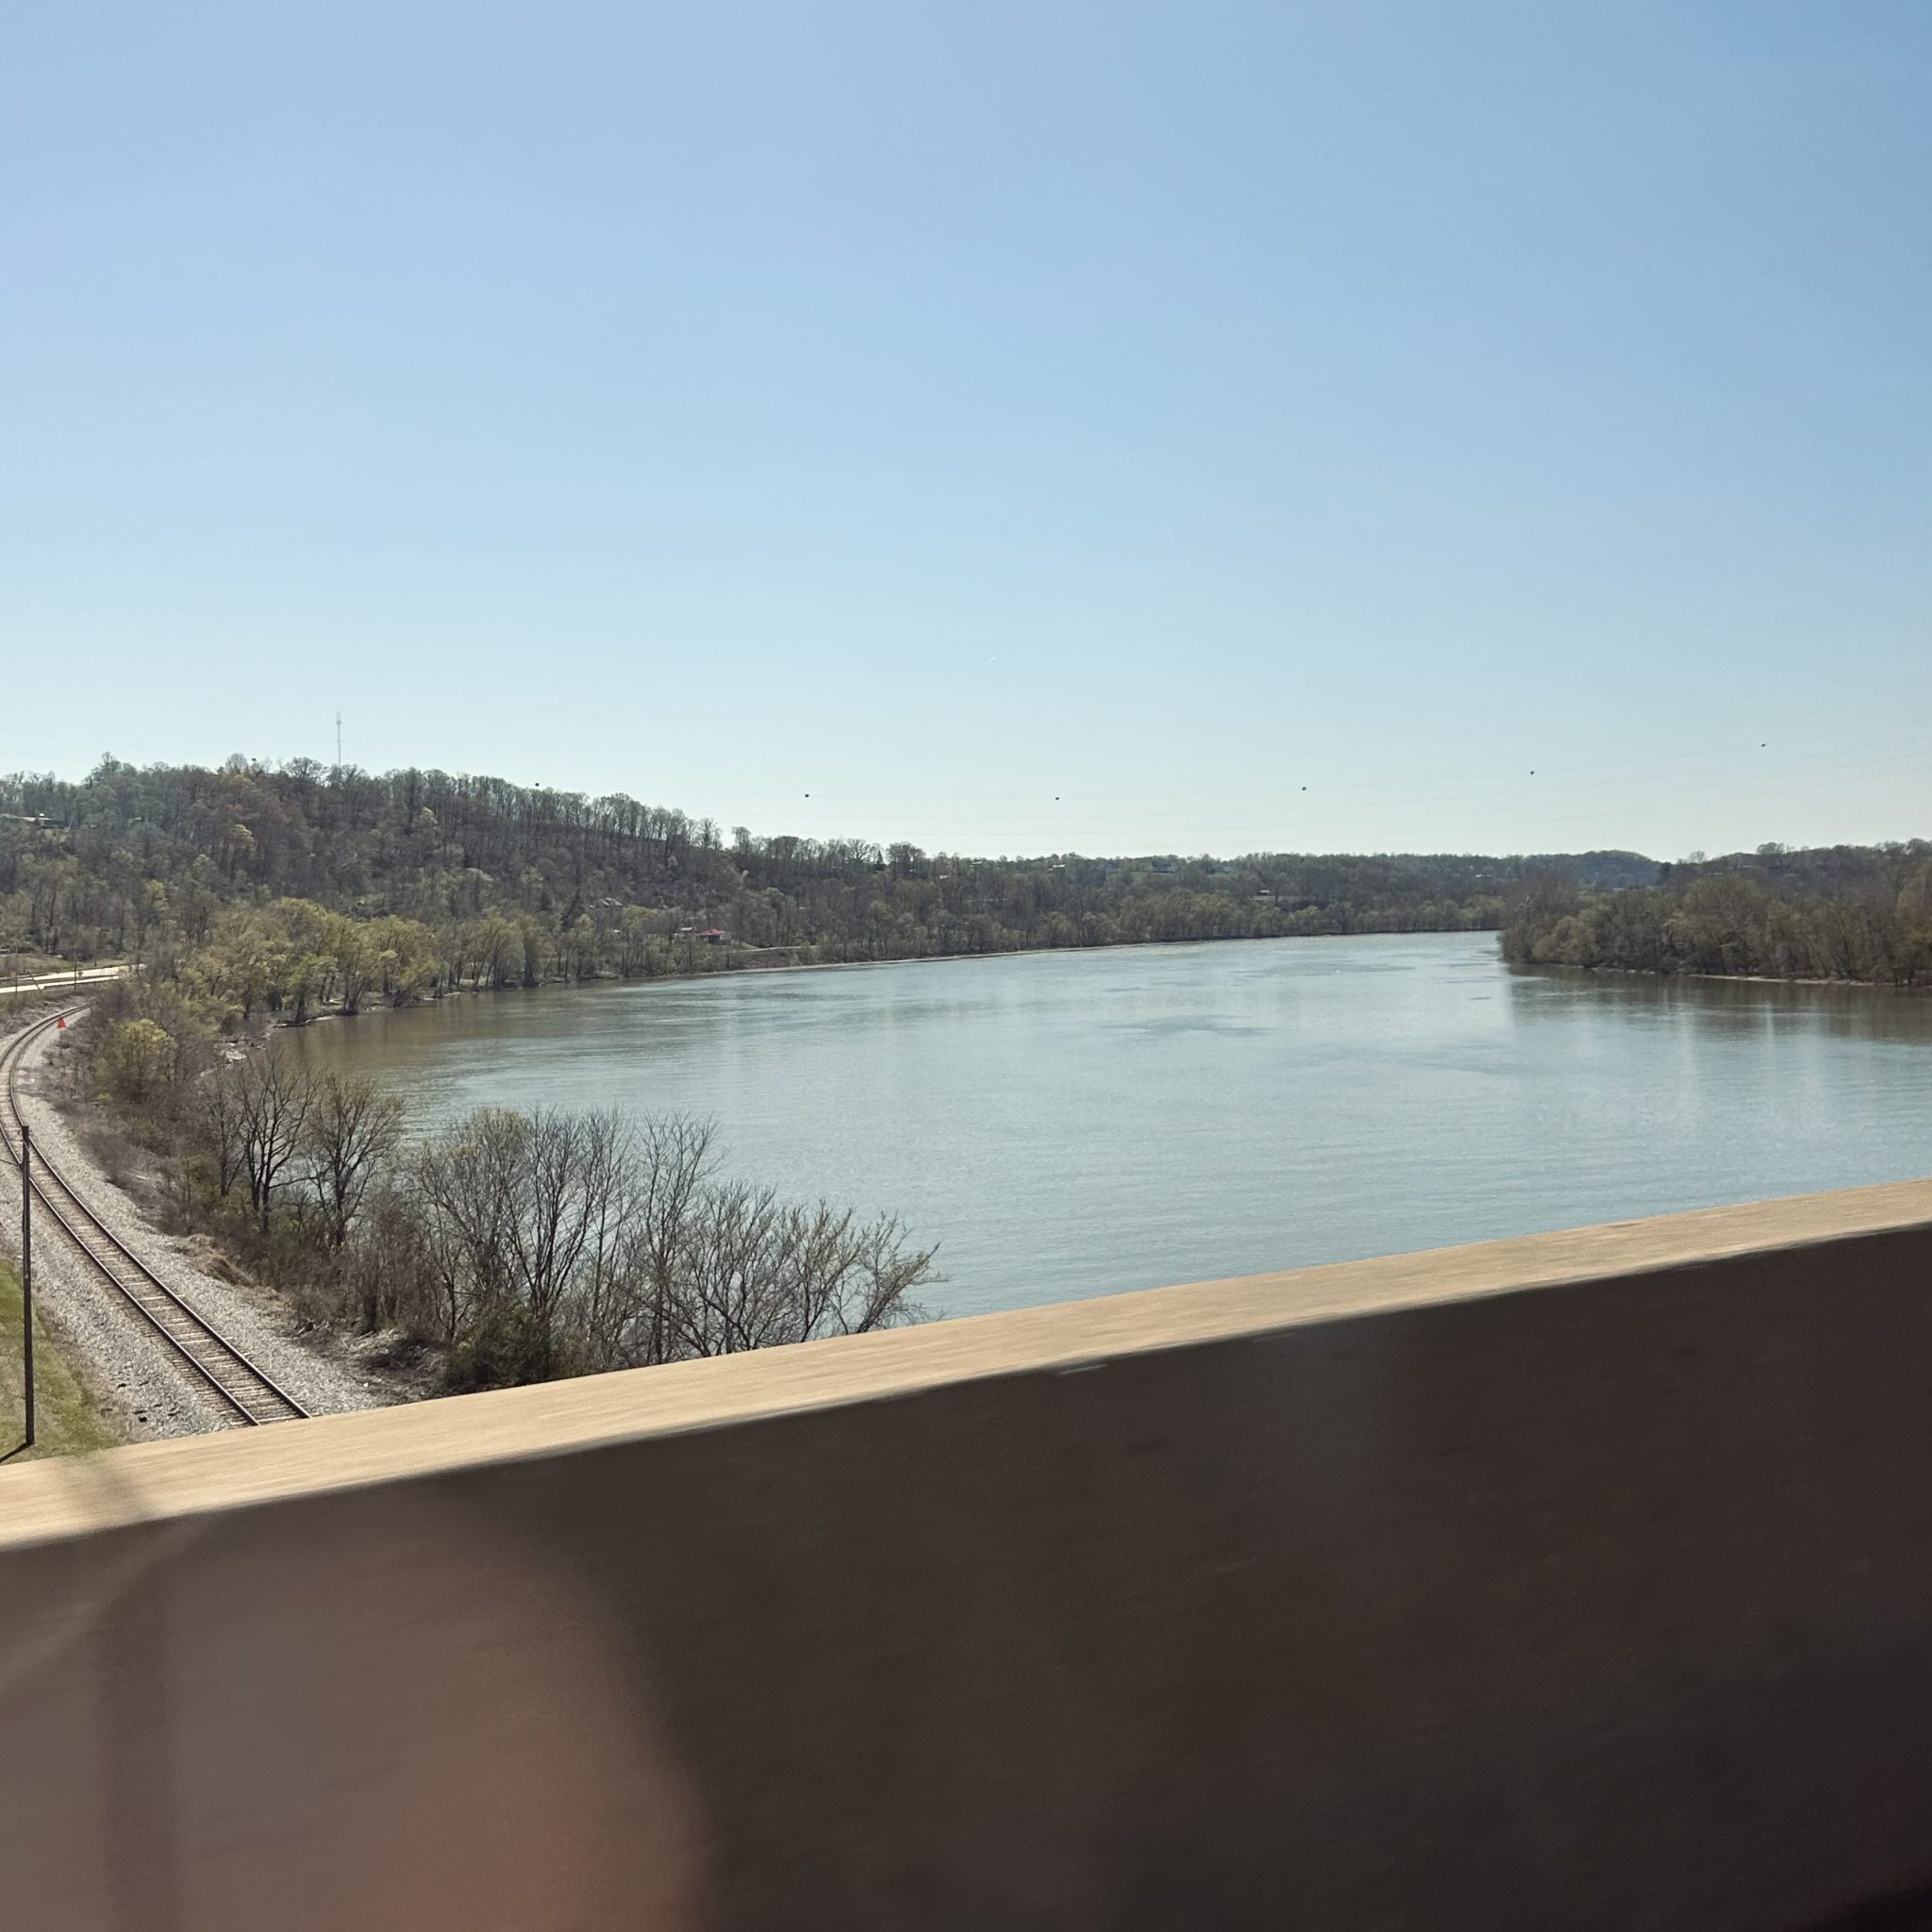 The Ohio River shot from the passenger seat of a car crossing the border from Ohio into West Virginia on a sunny day